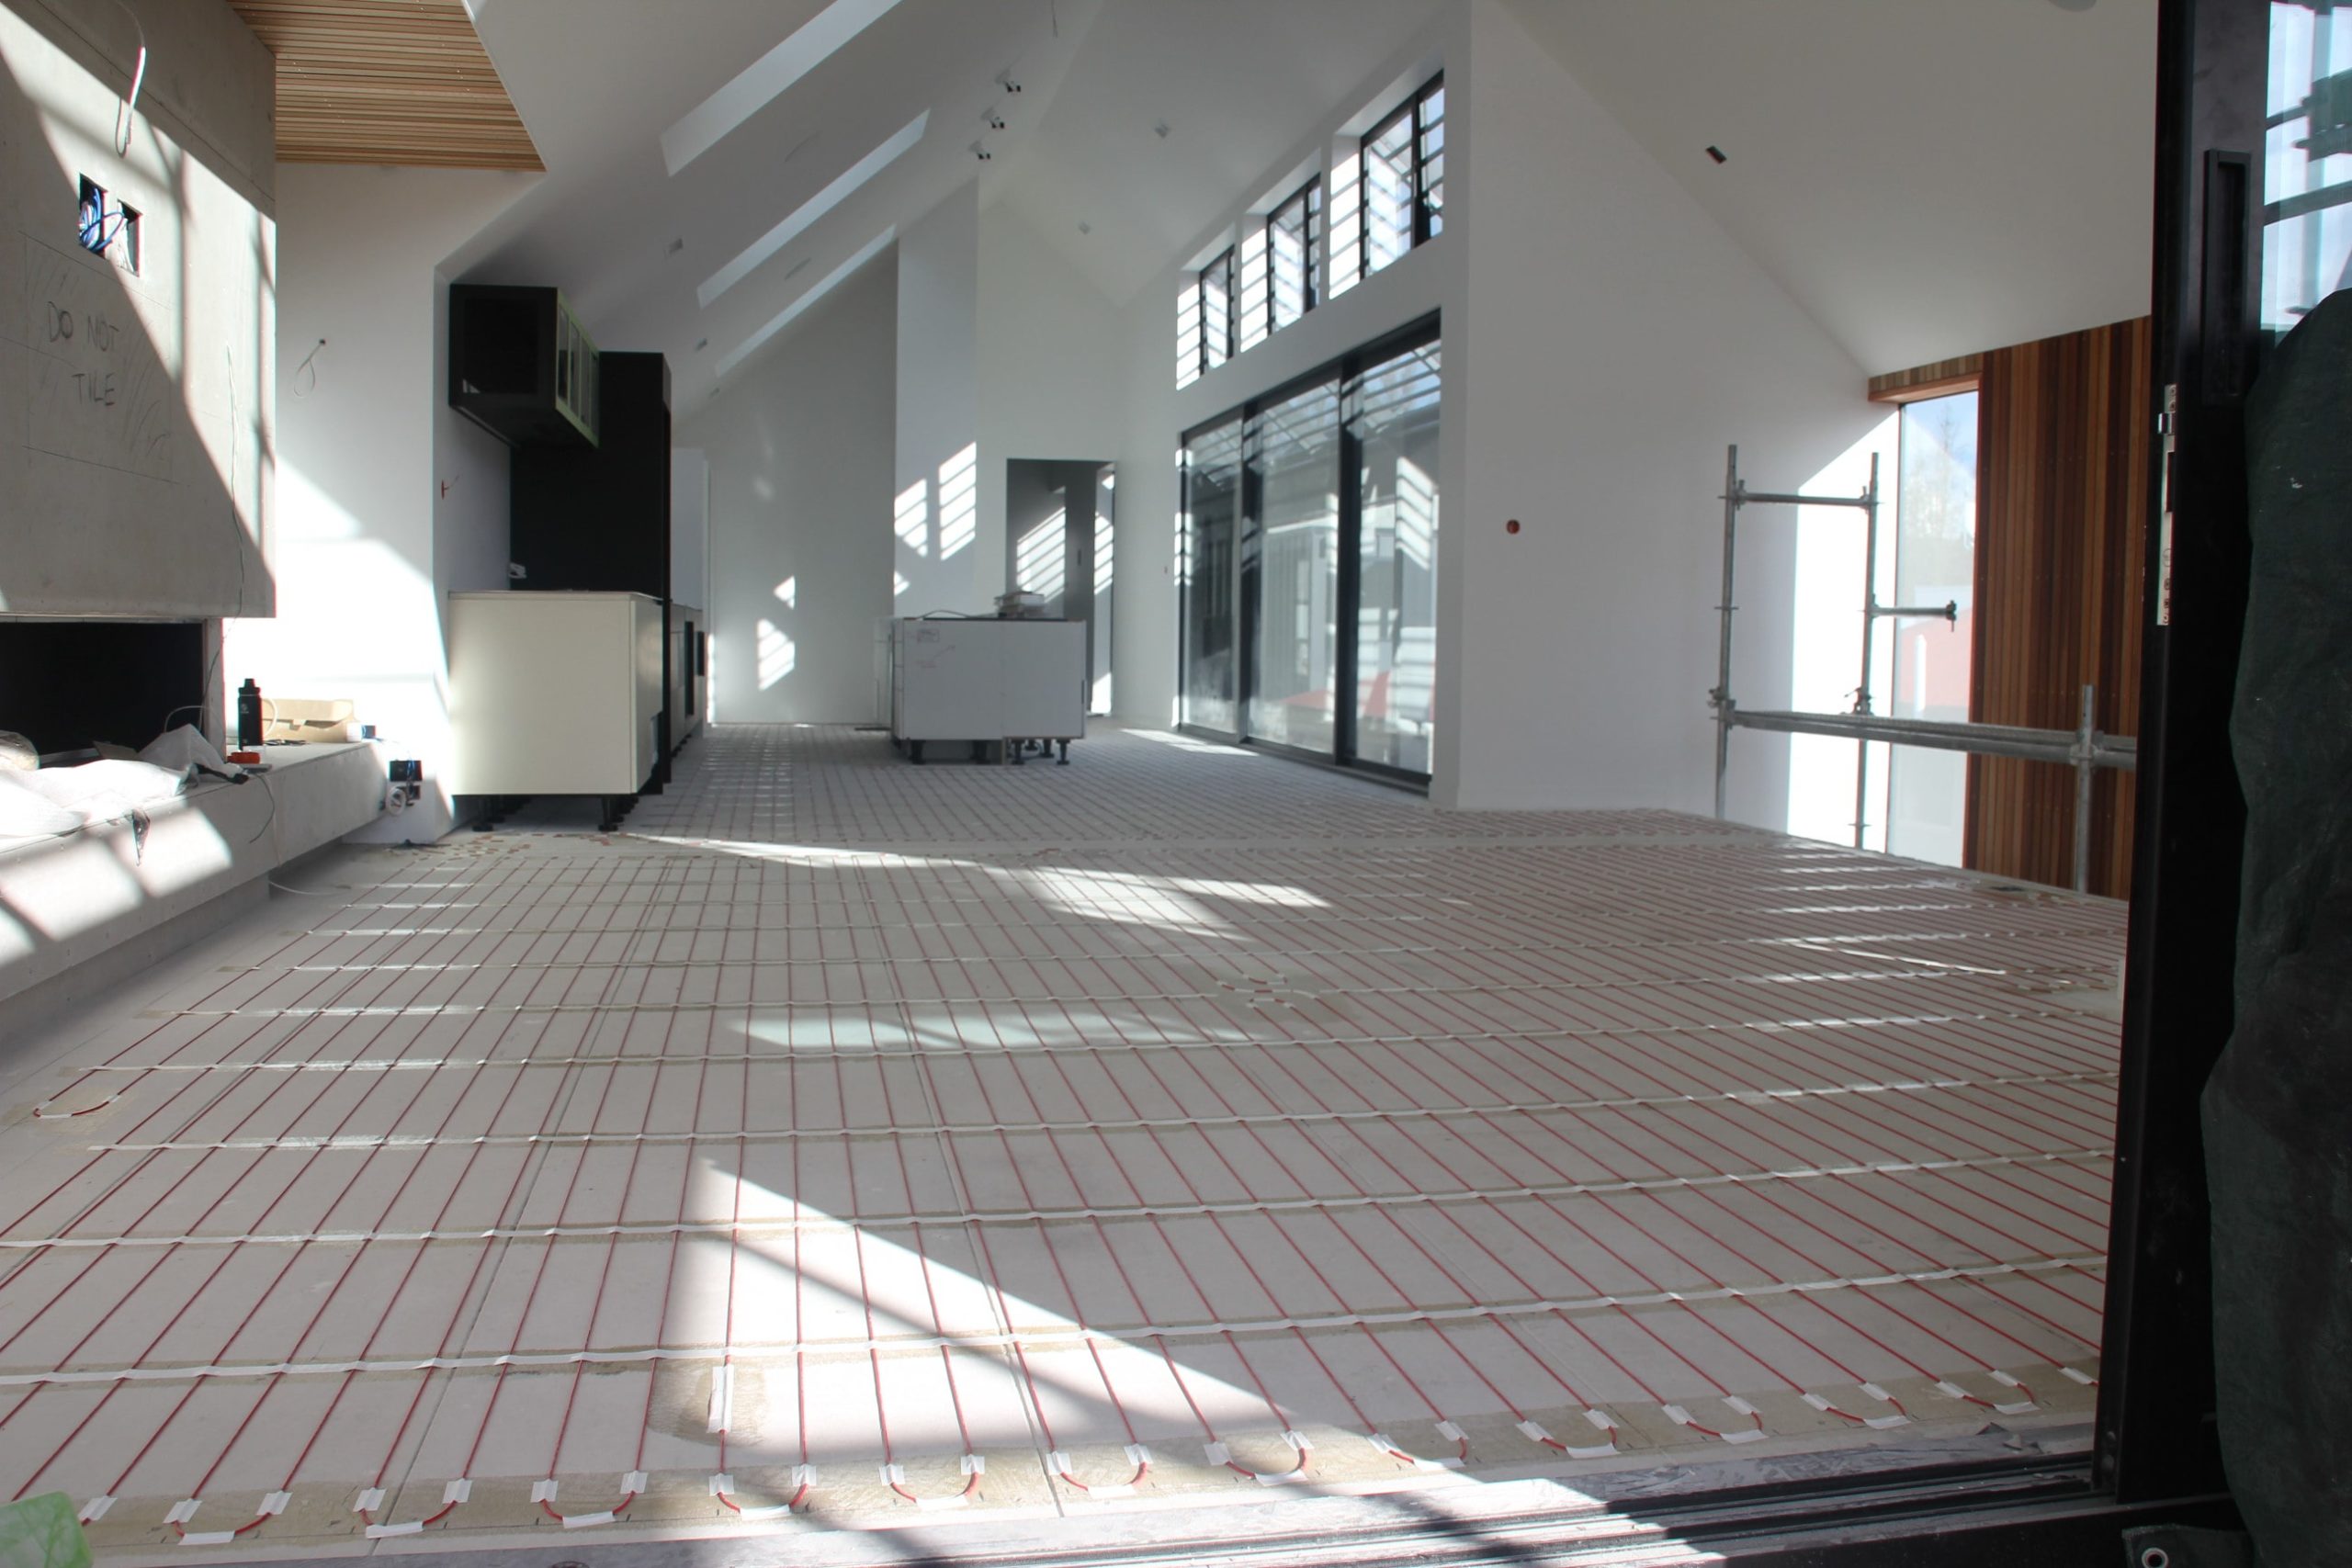 Installation of Thermafloor diy under tile heating systems, New Zealand. See the cost comparison between electric and hydronic